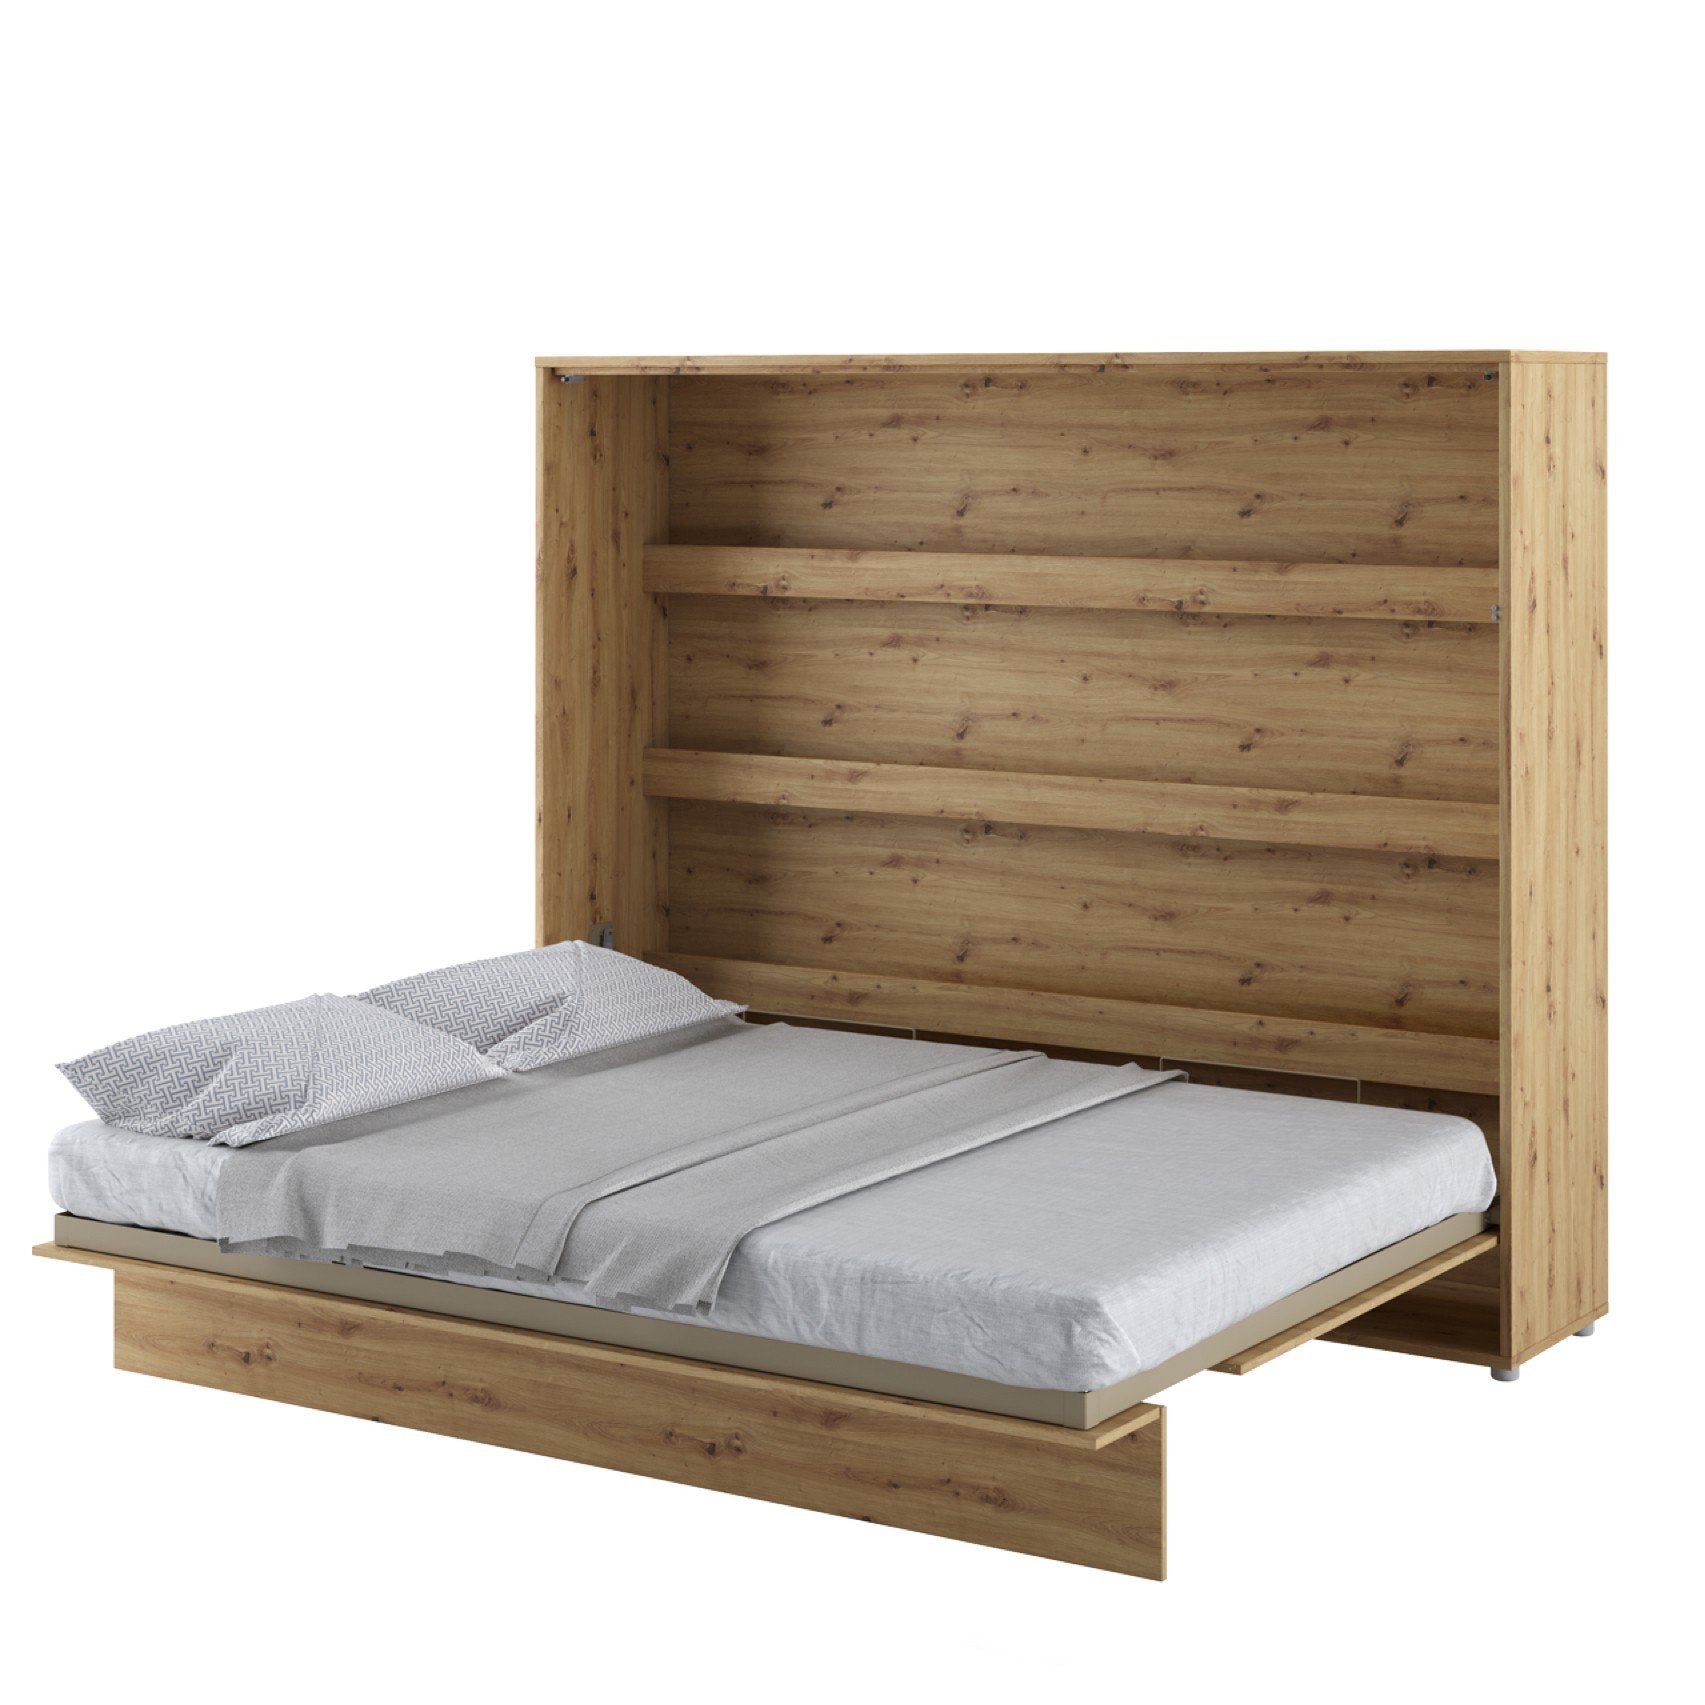 View BC14 Horizontal Wall Bed Concept 160cm Murphy Bed Oak Artisan 160 x 200cm information